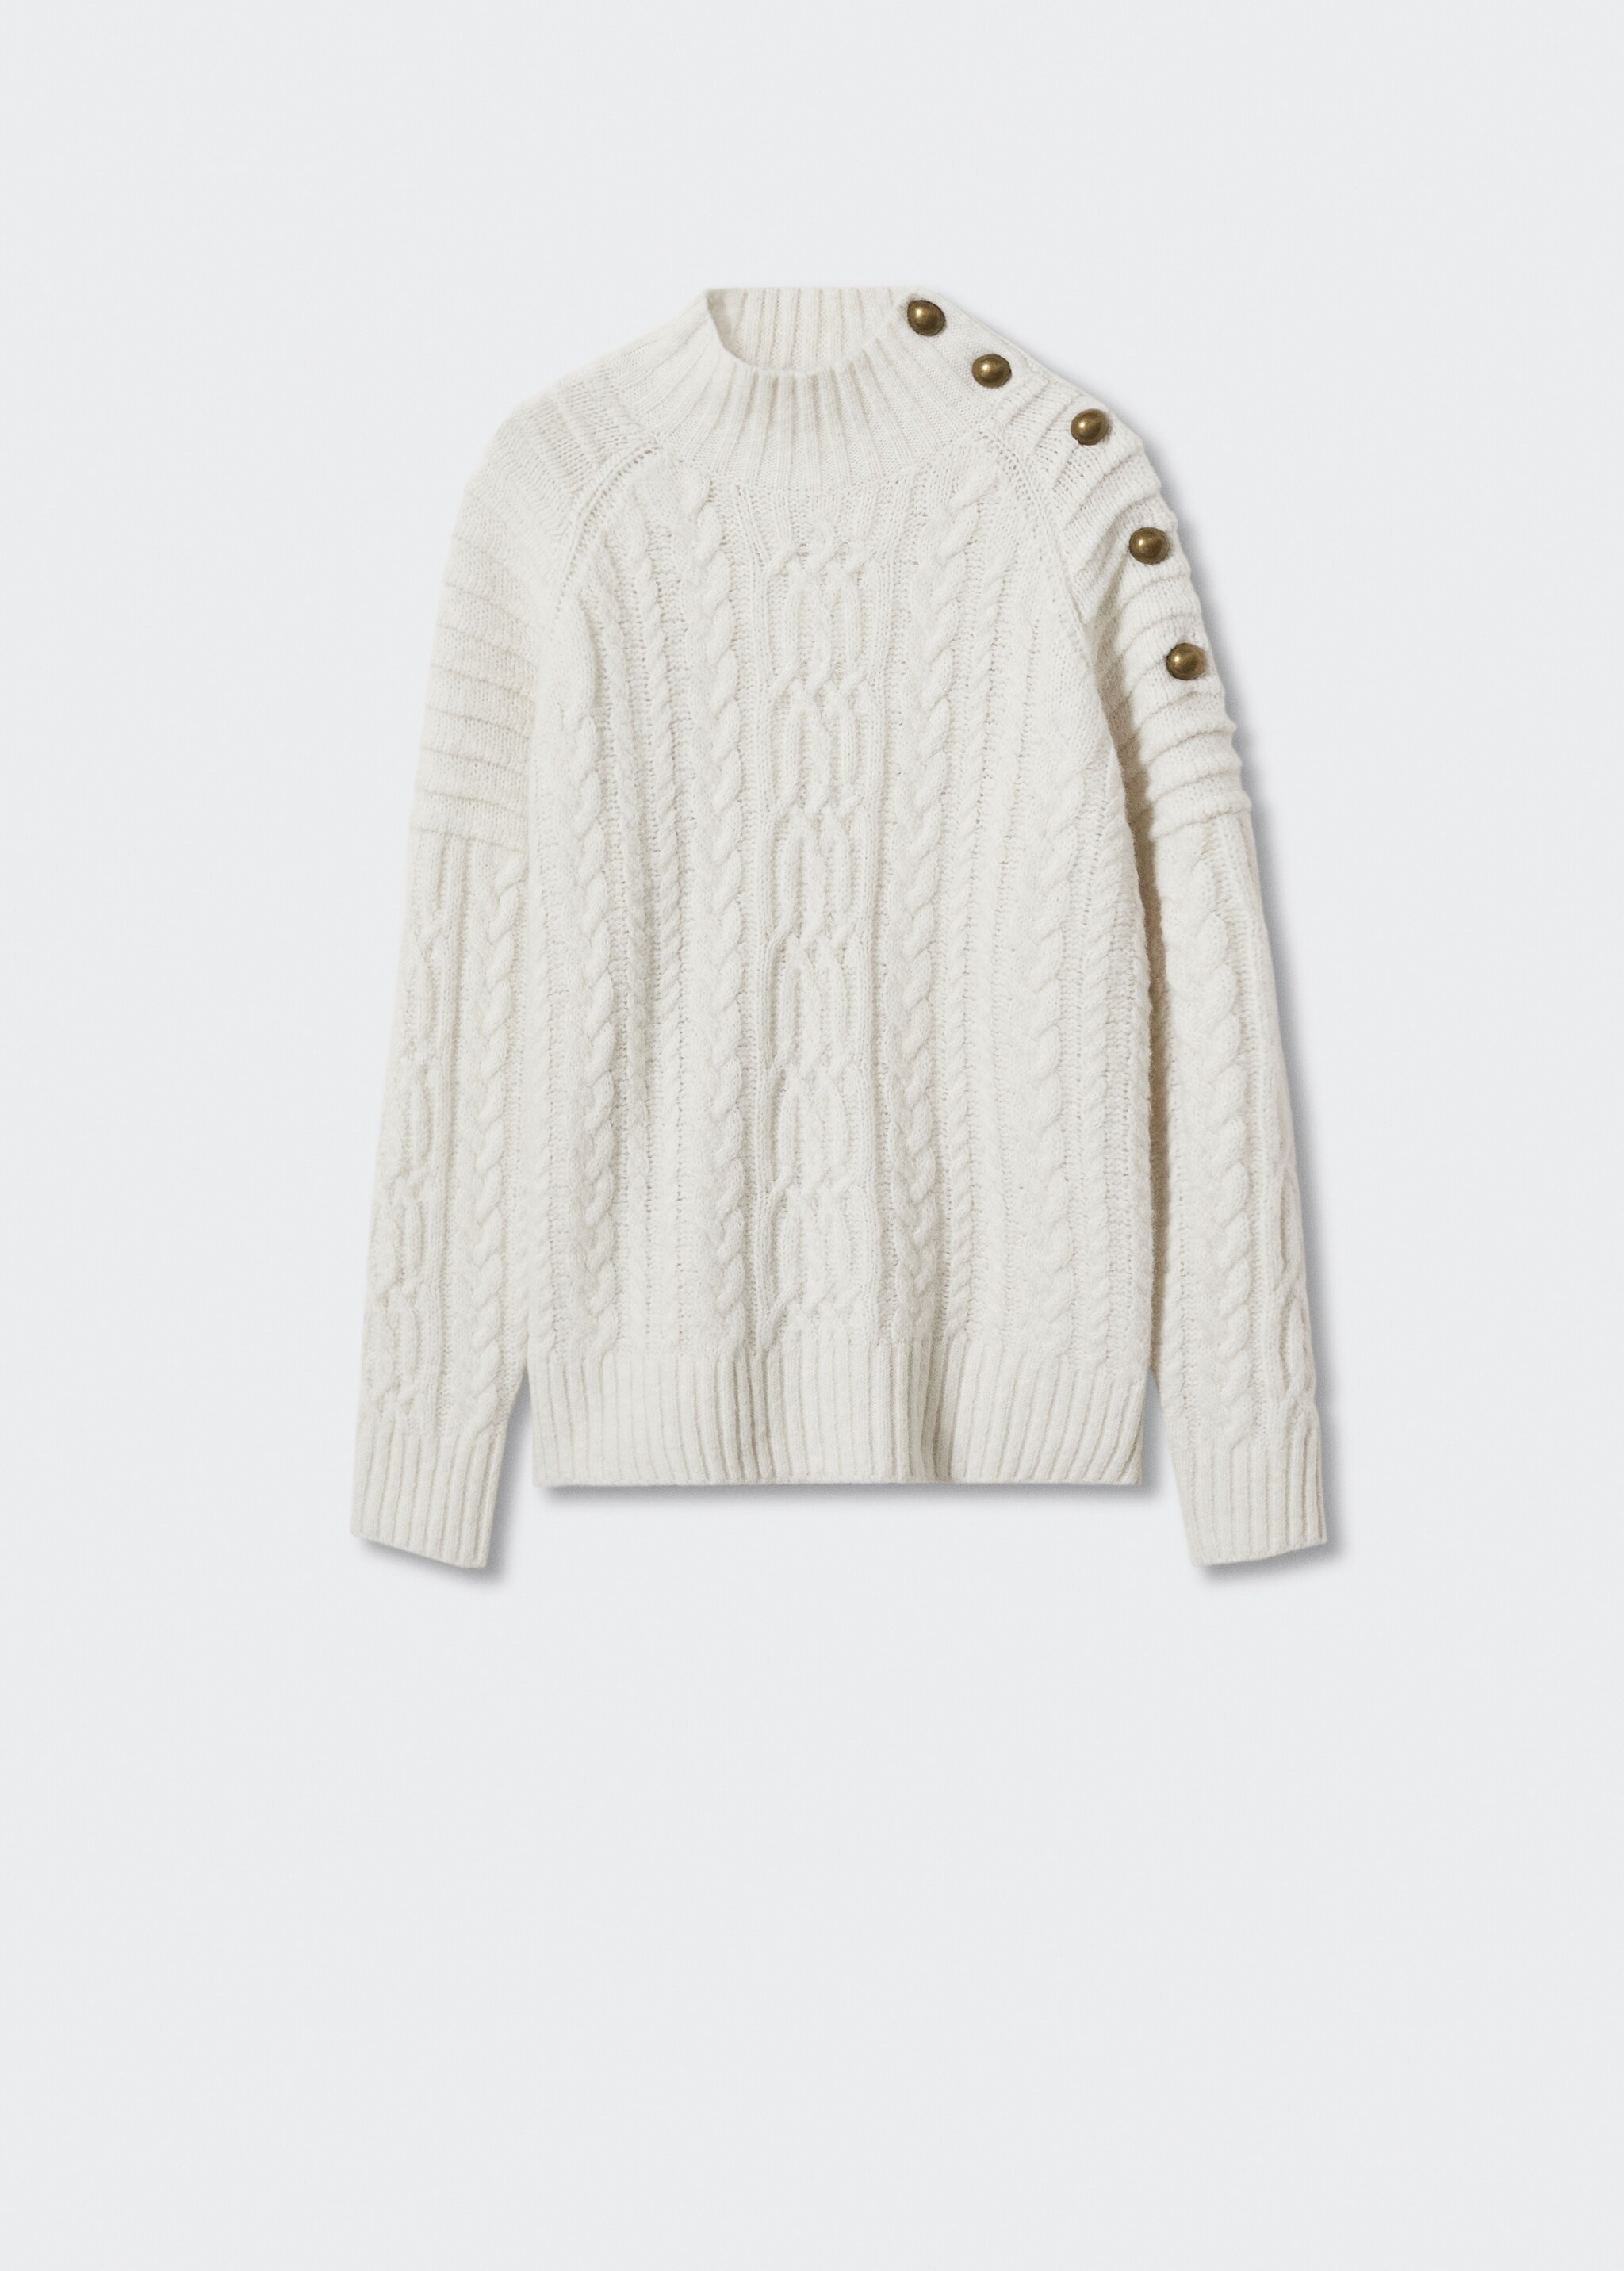 Buttoned knit braided sweater - Article without model